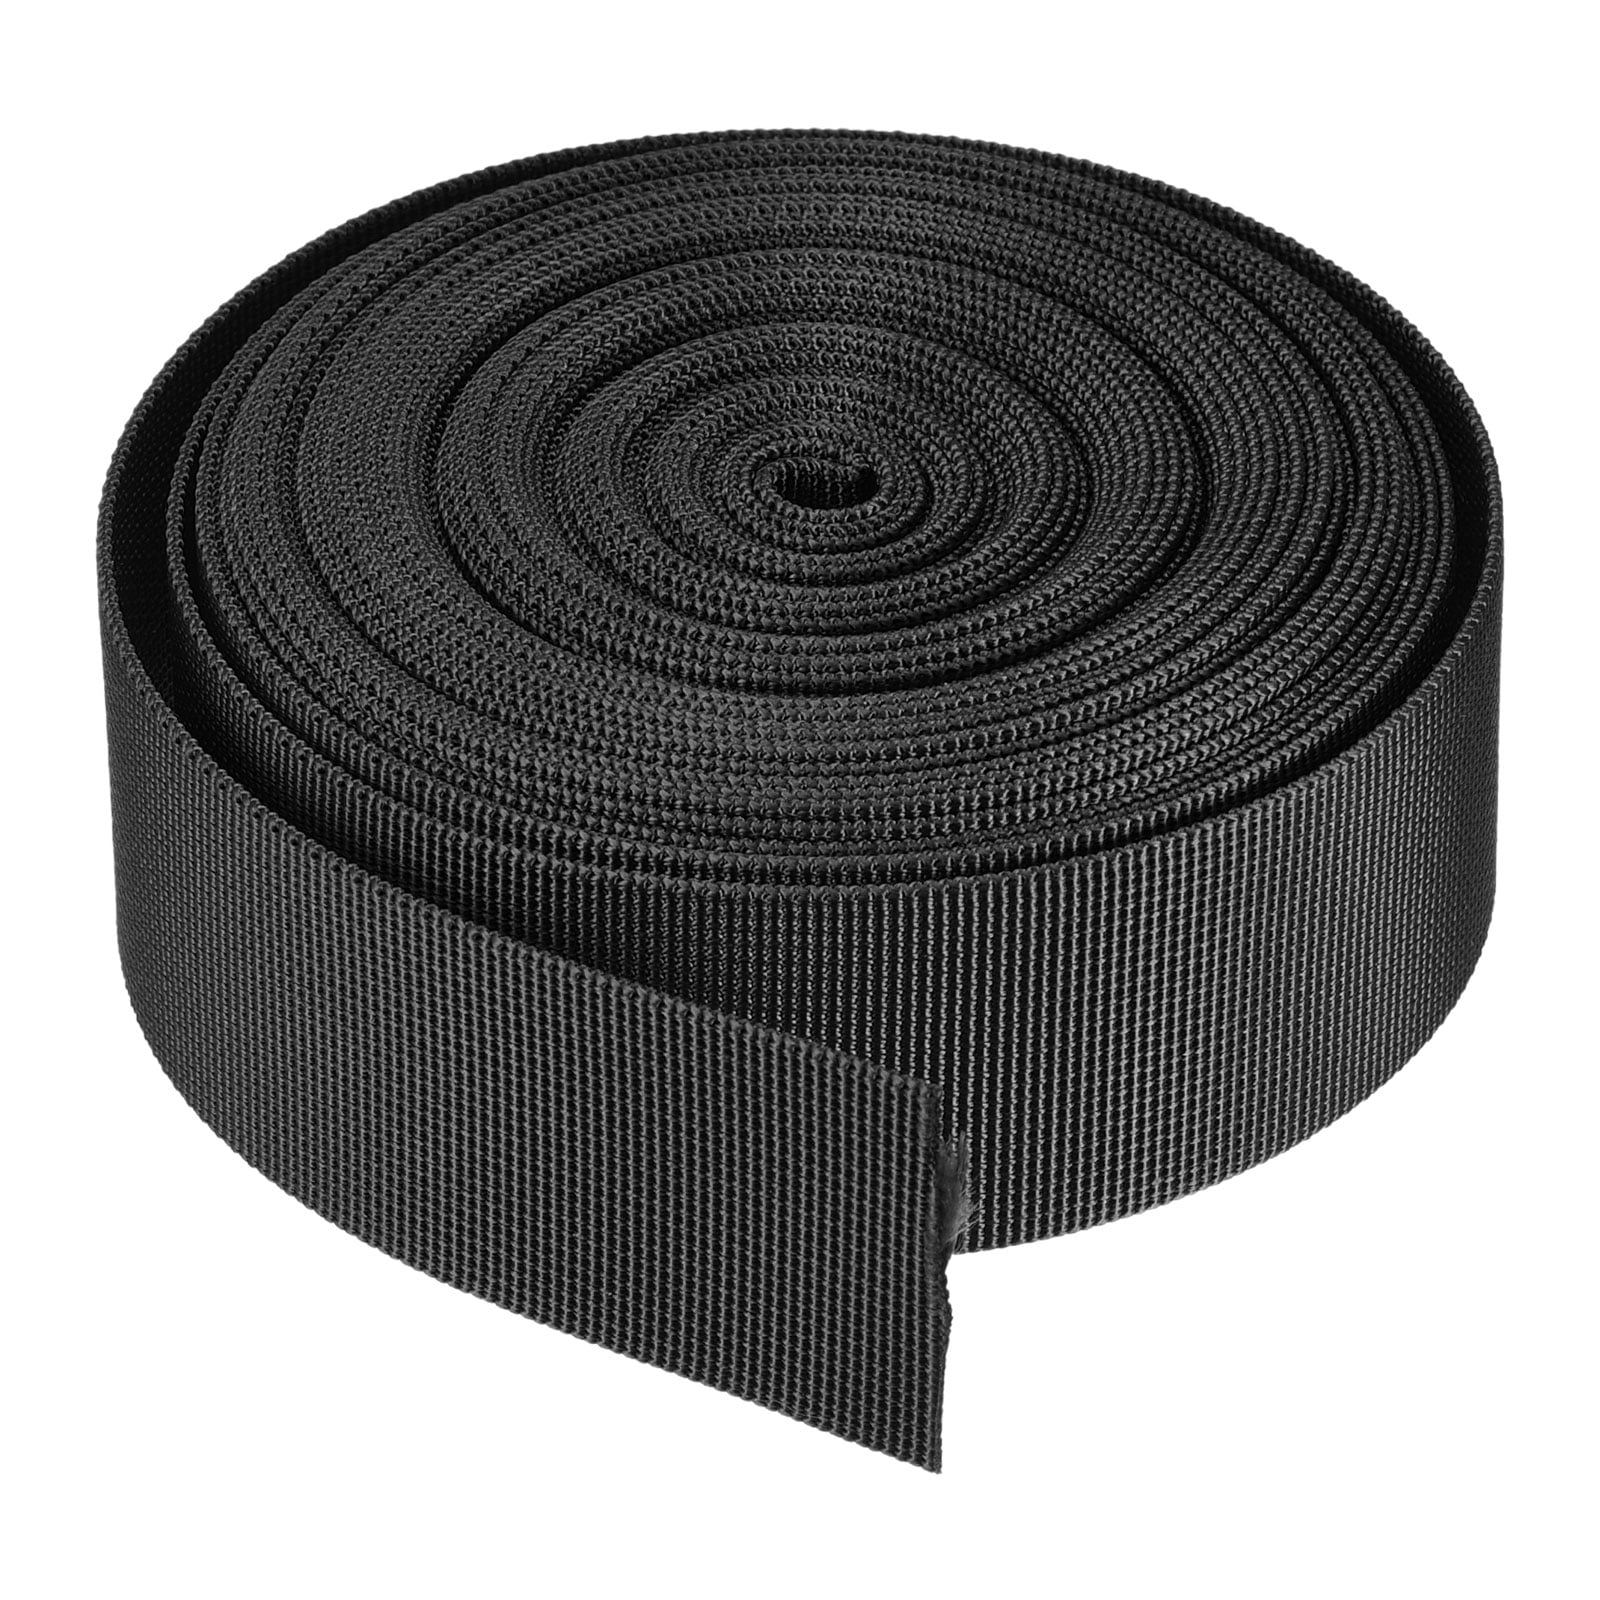 Nylon, Cotton, & Poly Webbing for Bags, Belts, & More